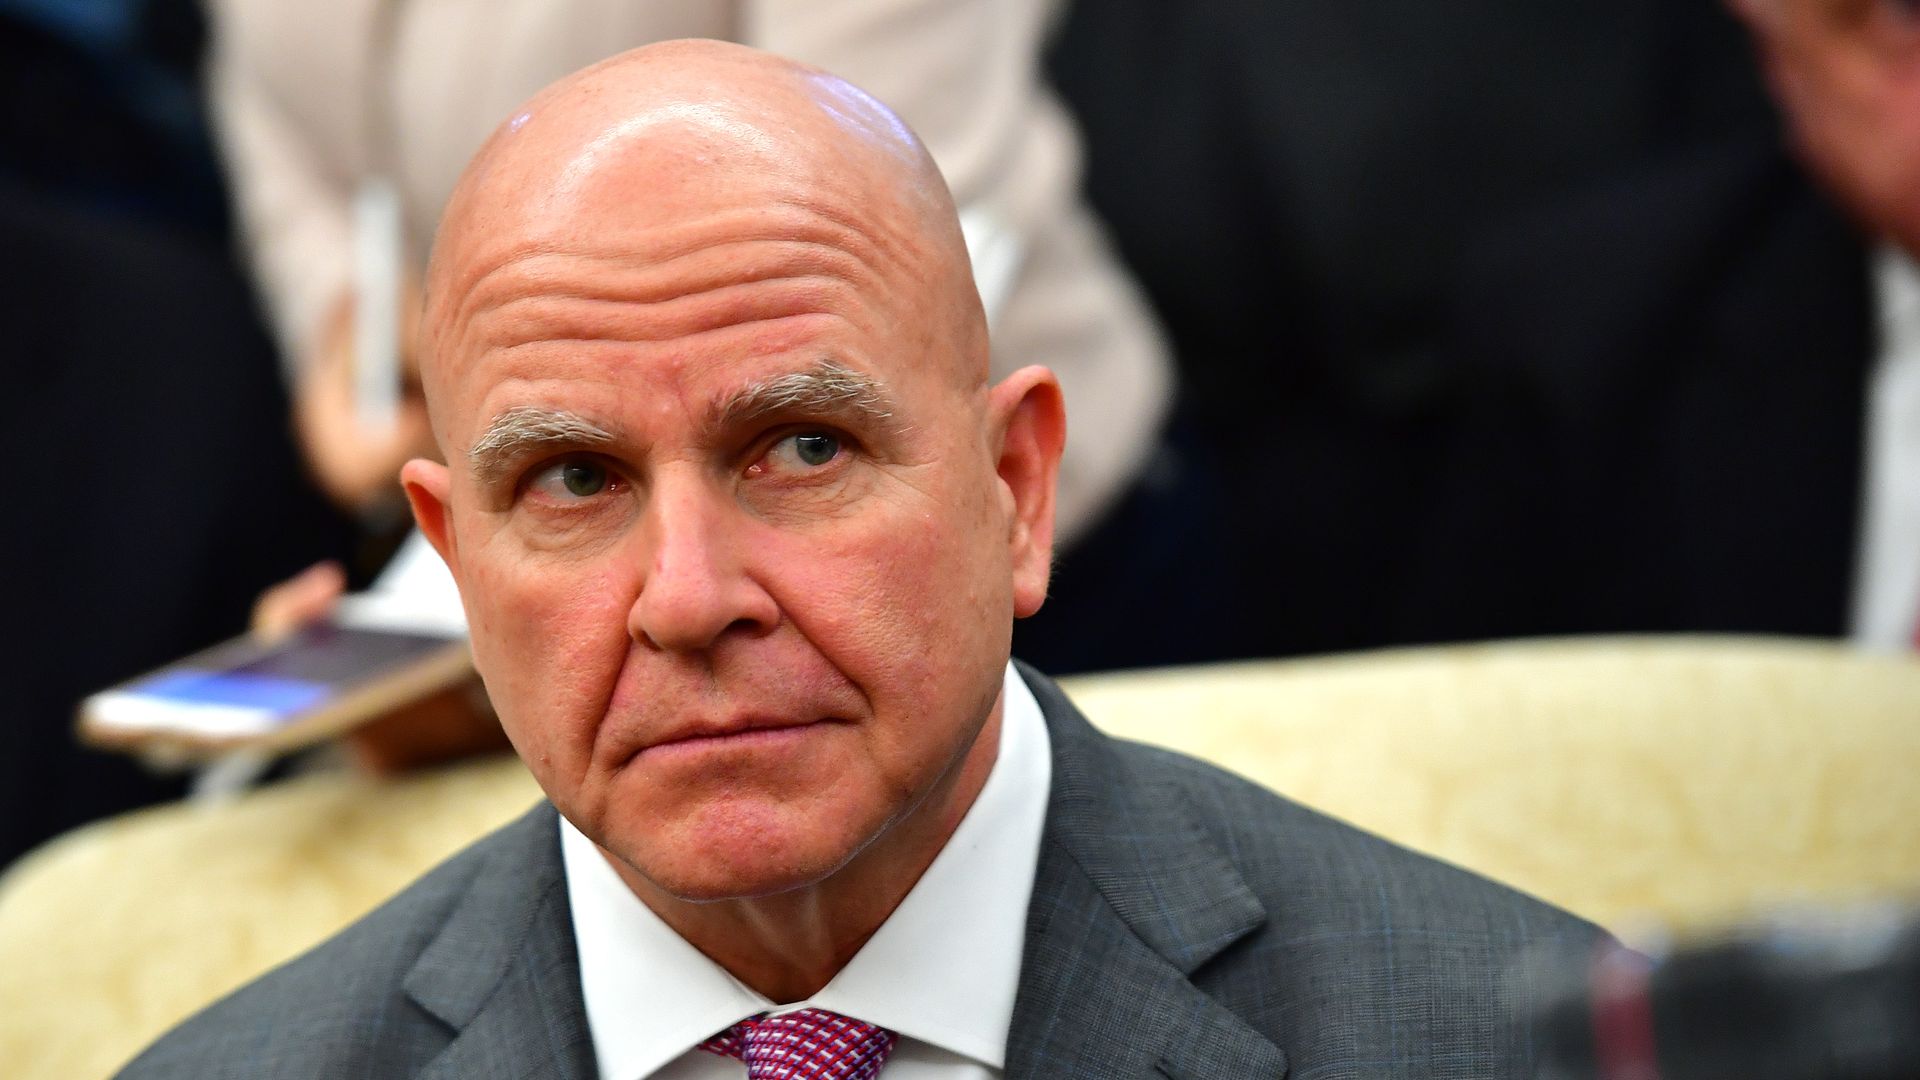 H.R. McMaster in the Oval Office in March 2018.